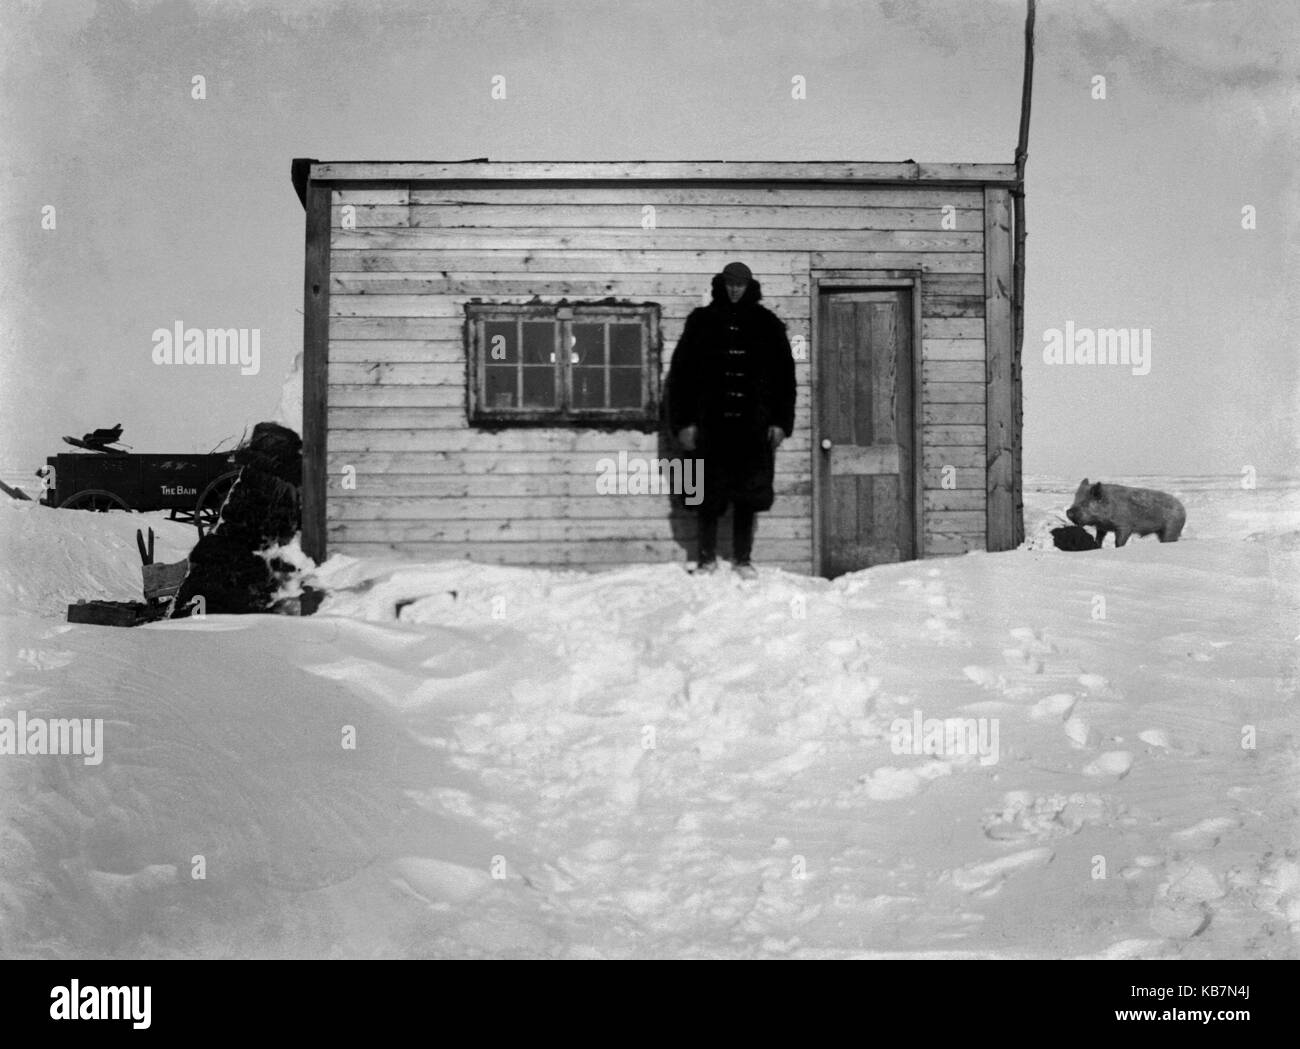 AJAXNETPHOTO. 1903. CANADA, EXACT LOCATION UNKNOWN. - ANNOTATION ON GLASS PLATE 'HAL SHACK'. MAN STOOD OUTSIDE A WOODEN SHACK IN THE SNOW WITH A PIG. PHOTOGRAPHER:UNKNOWN © DIGITAL IMAGE COPYRIGHT AJAX VINTAGE PICTURE LIBRARY SOURCE: AJAX VINTAGE PICTURE LIBRARY COLLECTION REF:AVL 2273 Stock Photo